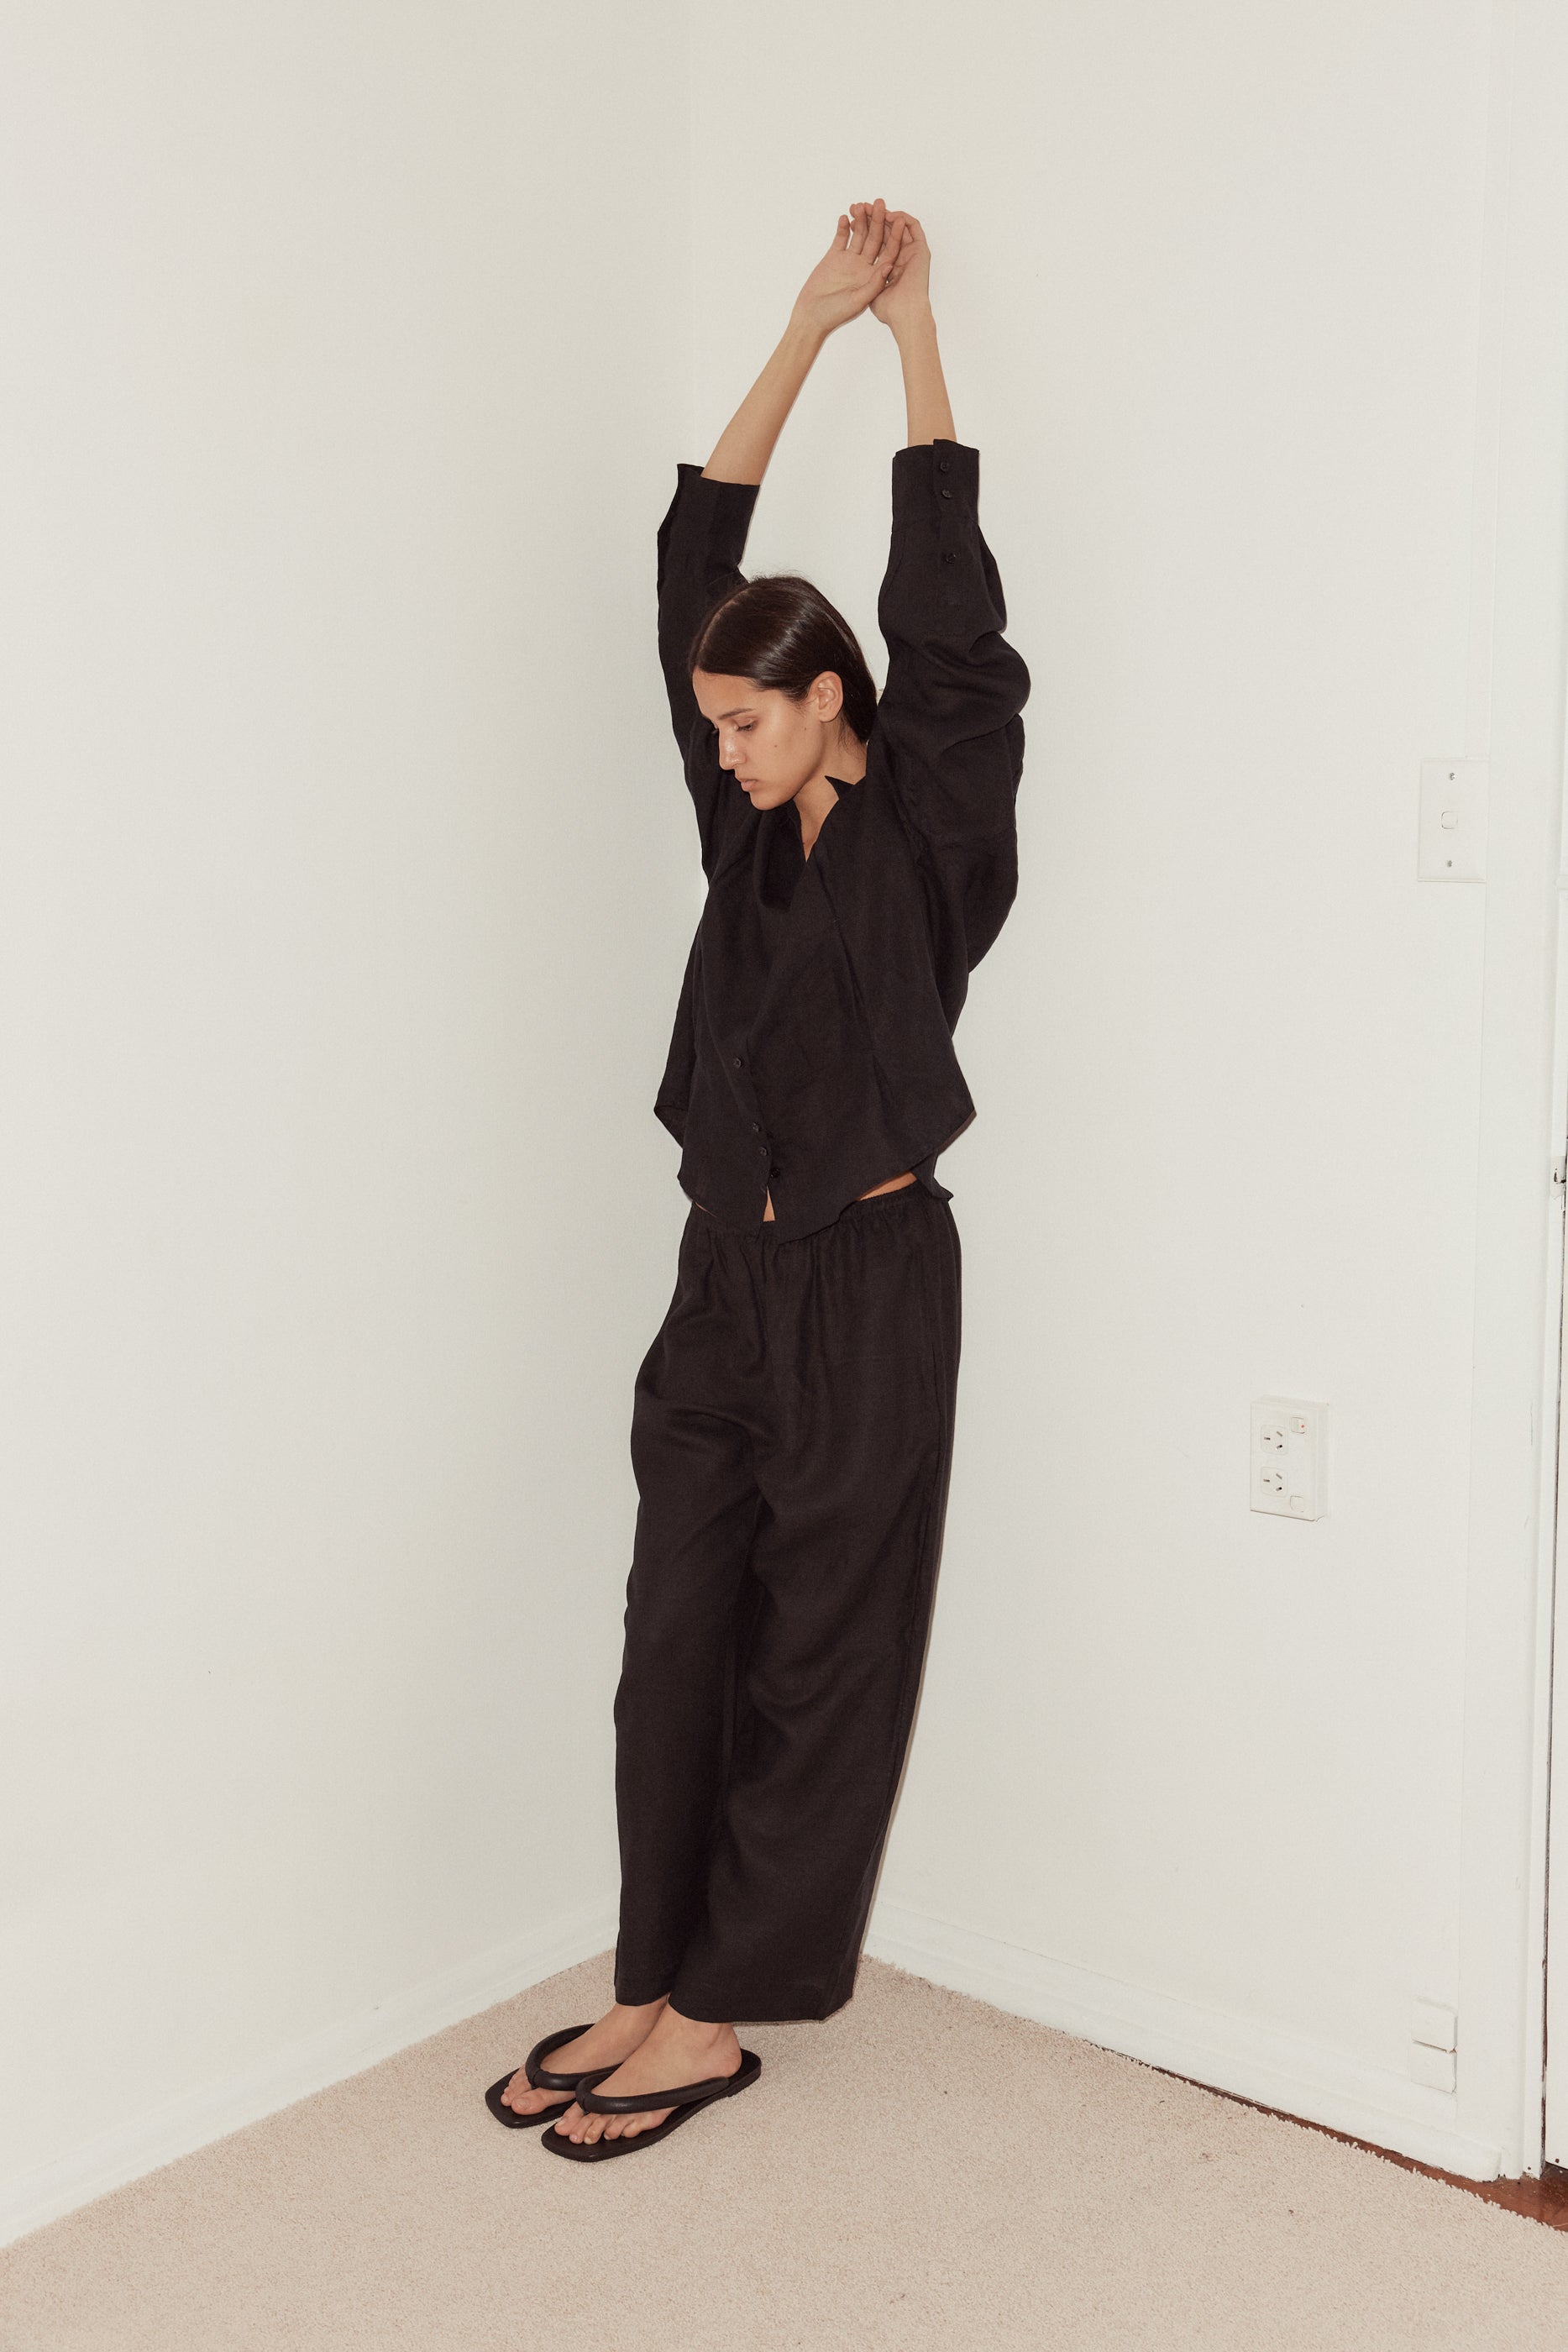 Female model standing in corner of white walls wearing the Tack Set by Deiji Studios in black, styled with off white scrunchie worn in hair. Tack Set pairs back with relaxed full length pant featuring soft elastic waist.